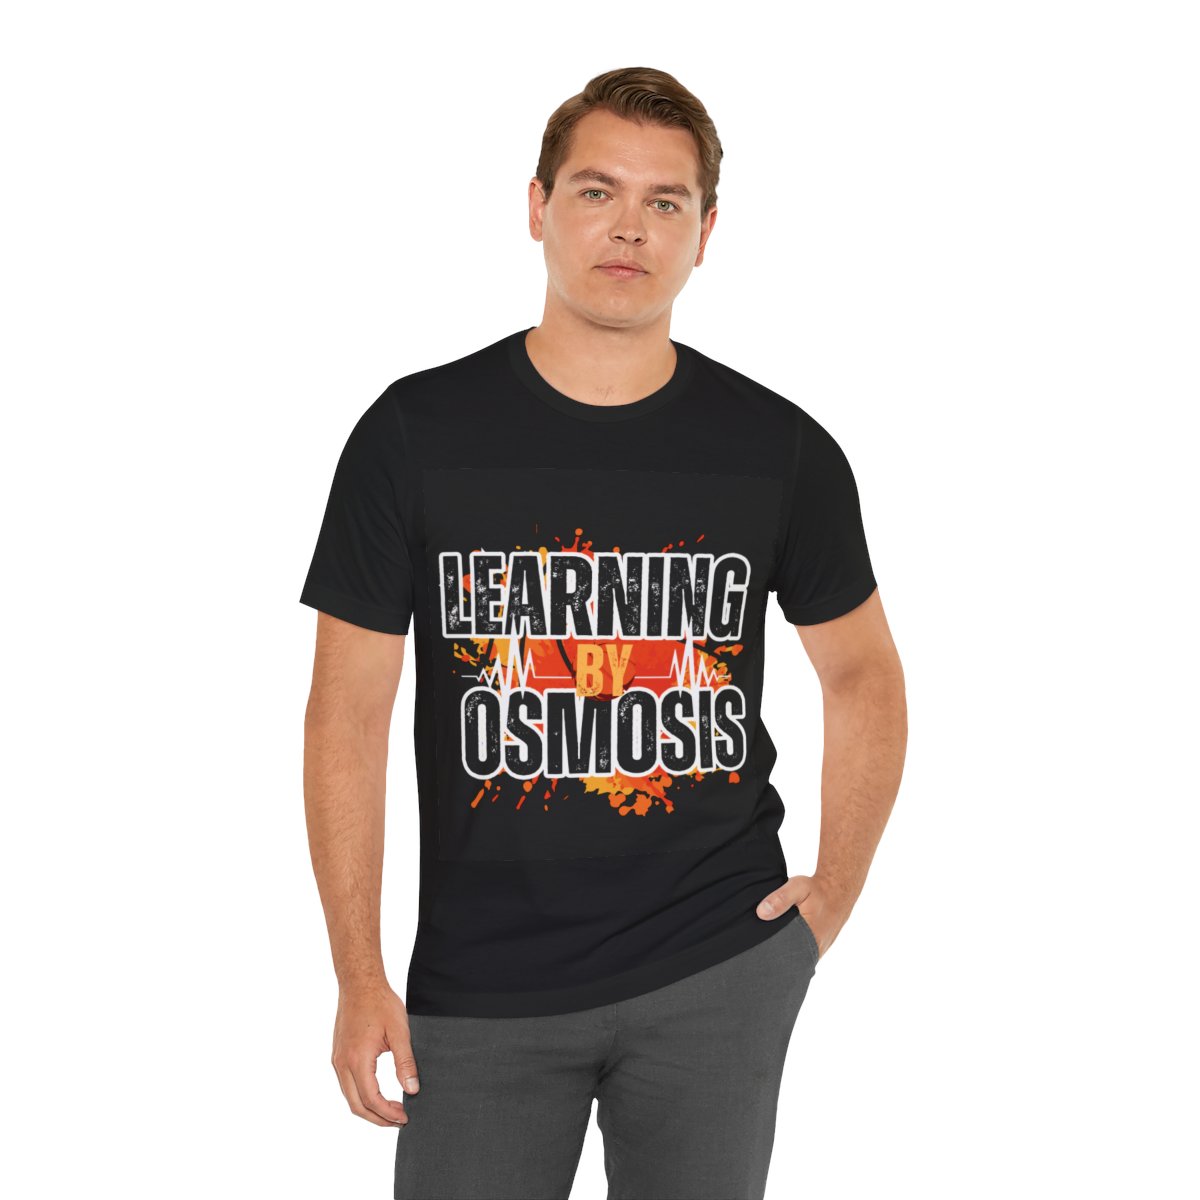 Learning By Osmosis shirt Express Delivery available product thumbnail image